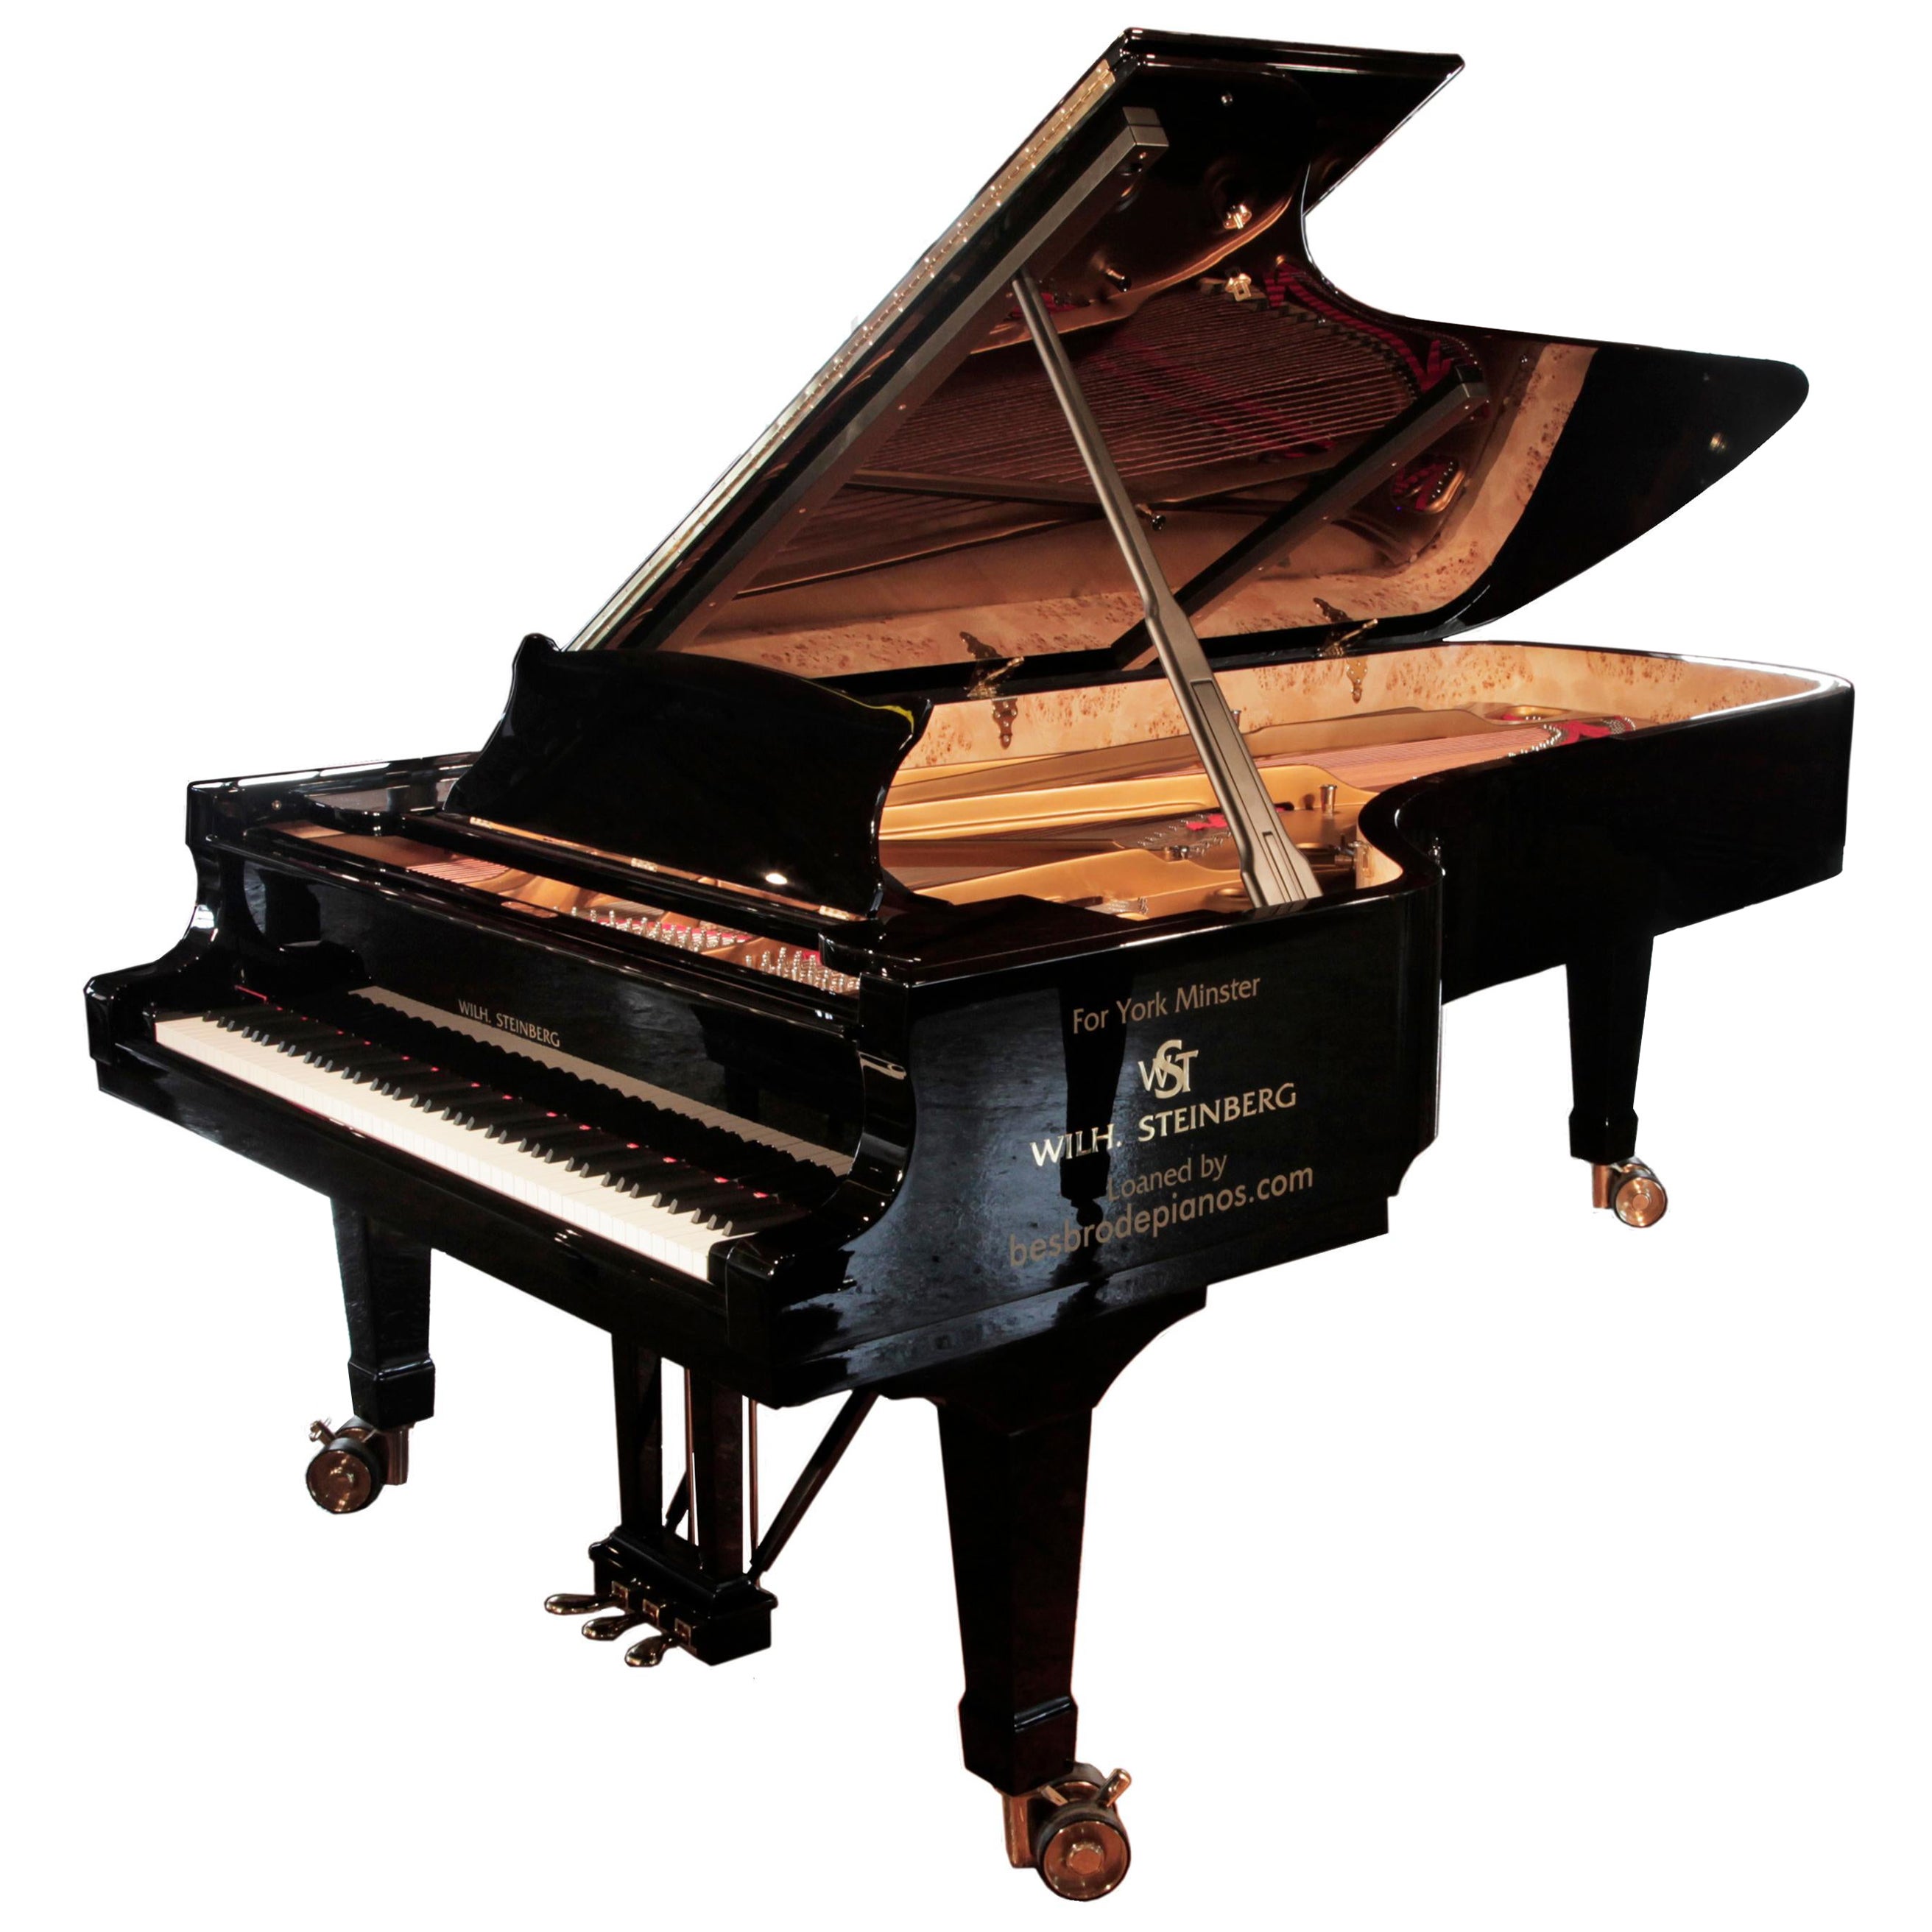 Wilh Steinberg WS-D275 Concert Grand Piano Bespoke For York Minster For Sale